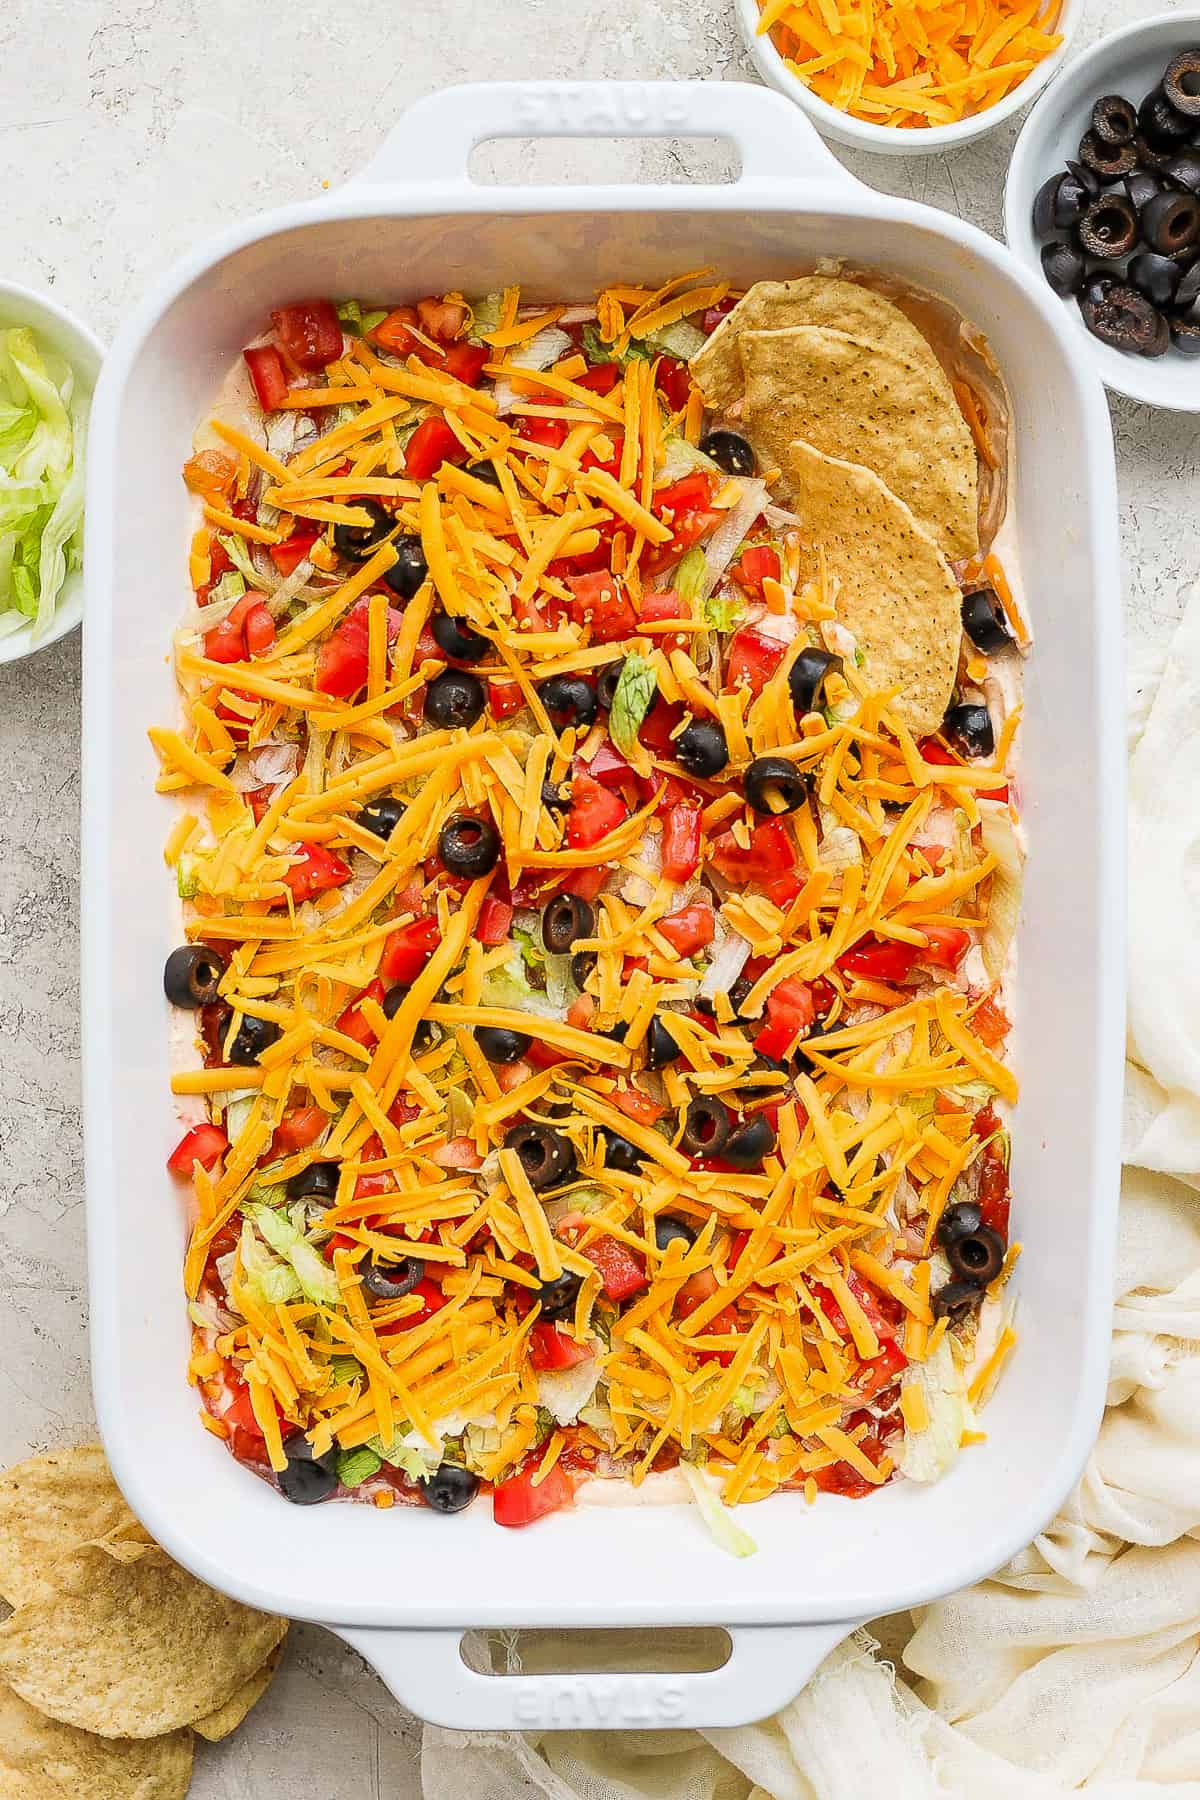 Taco dip in a baking dish topped with shredded cheese, tomatoes, and olive served with tortilla chips.